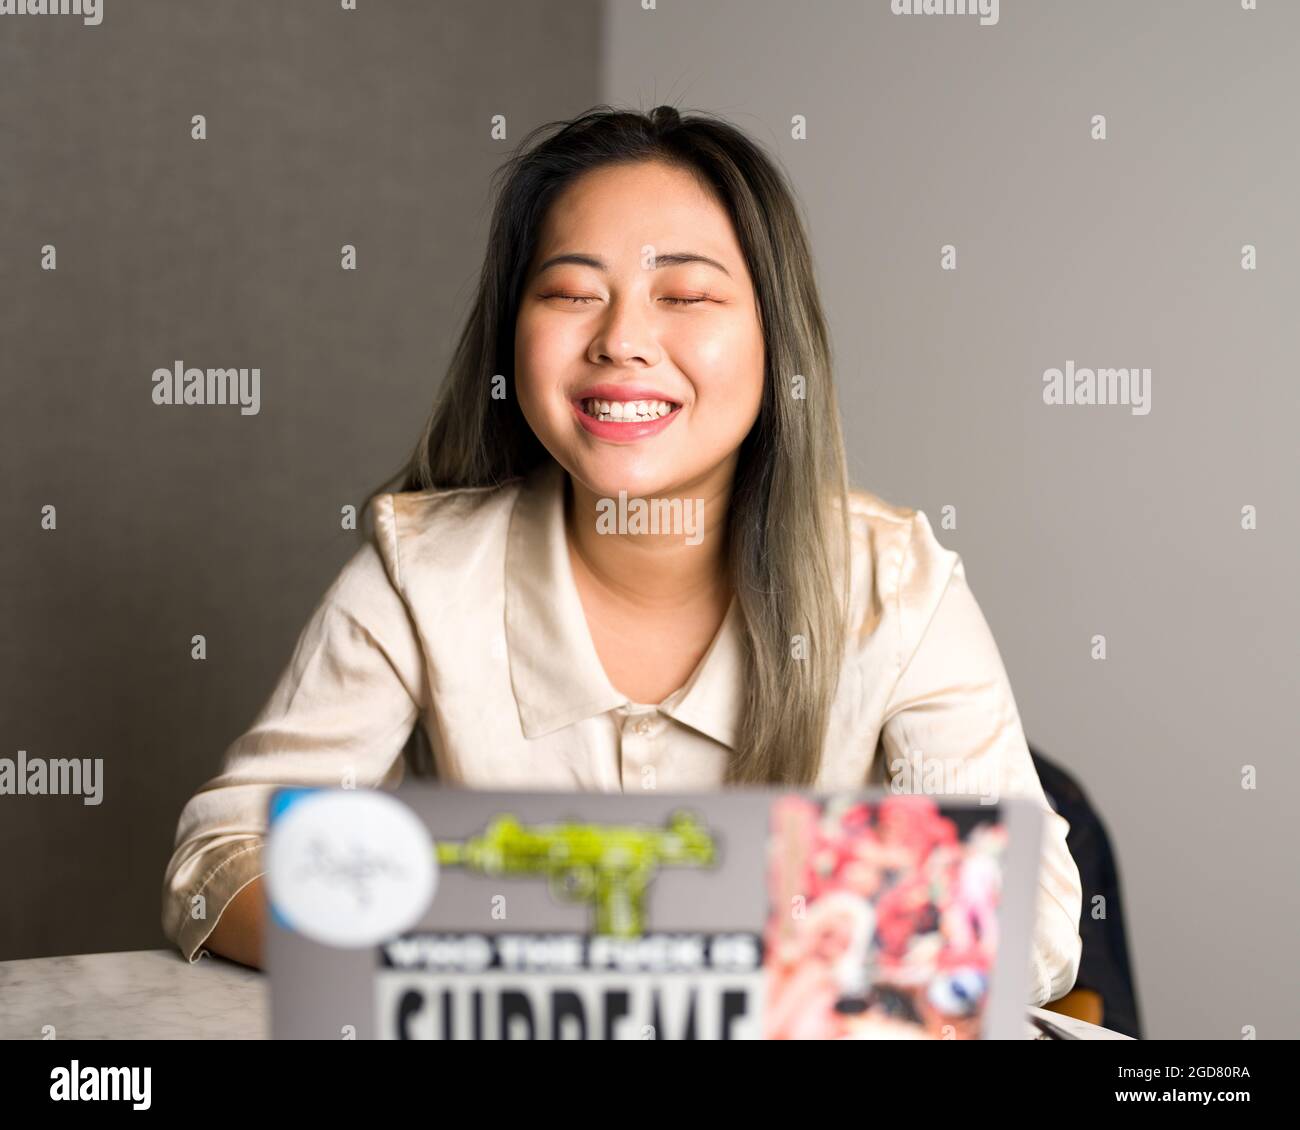 Young Asian Female Data Scientist Enjoying a Work Meeting Stock Photo